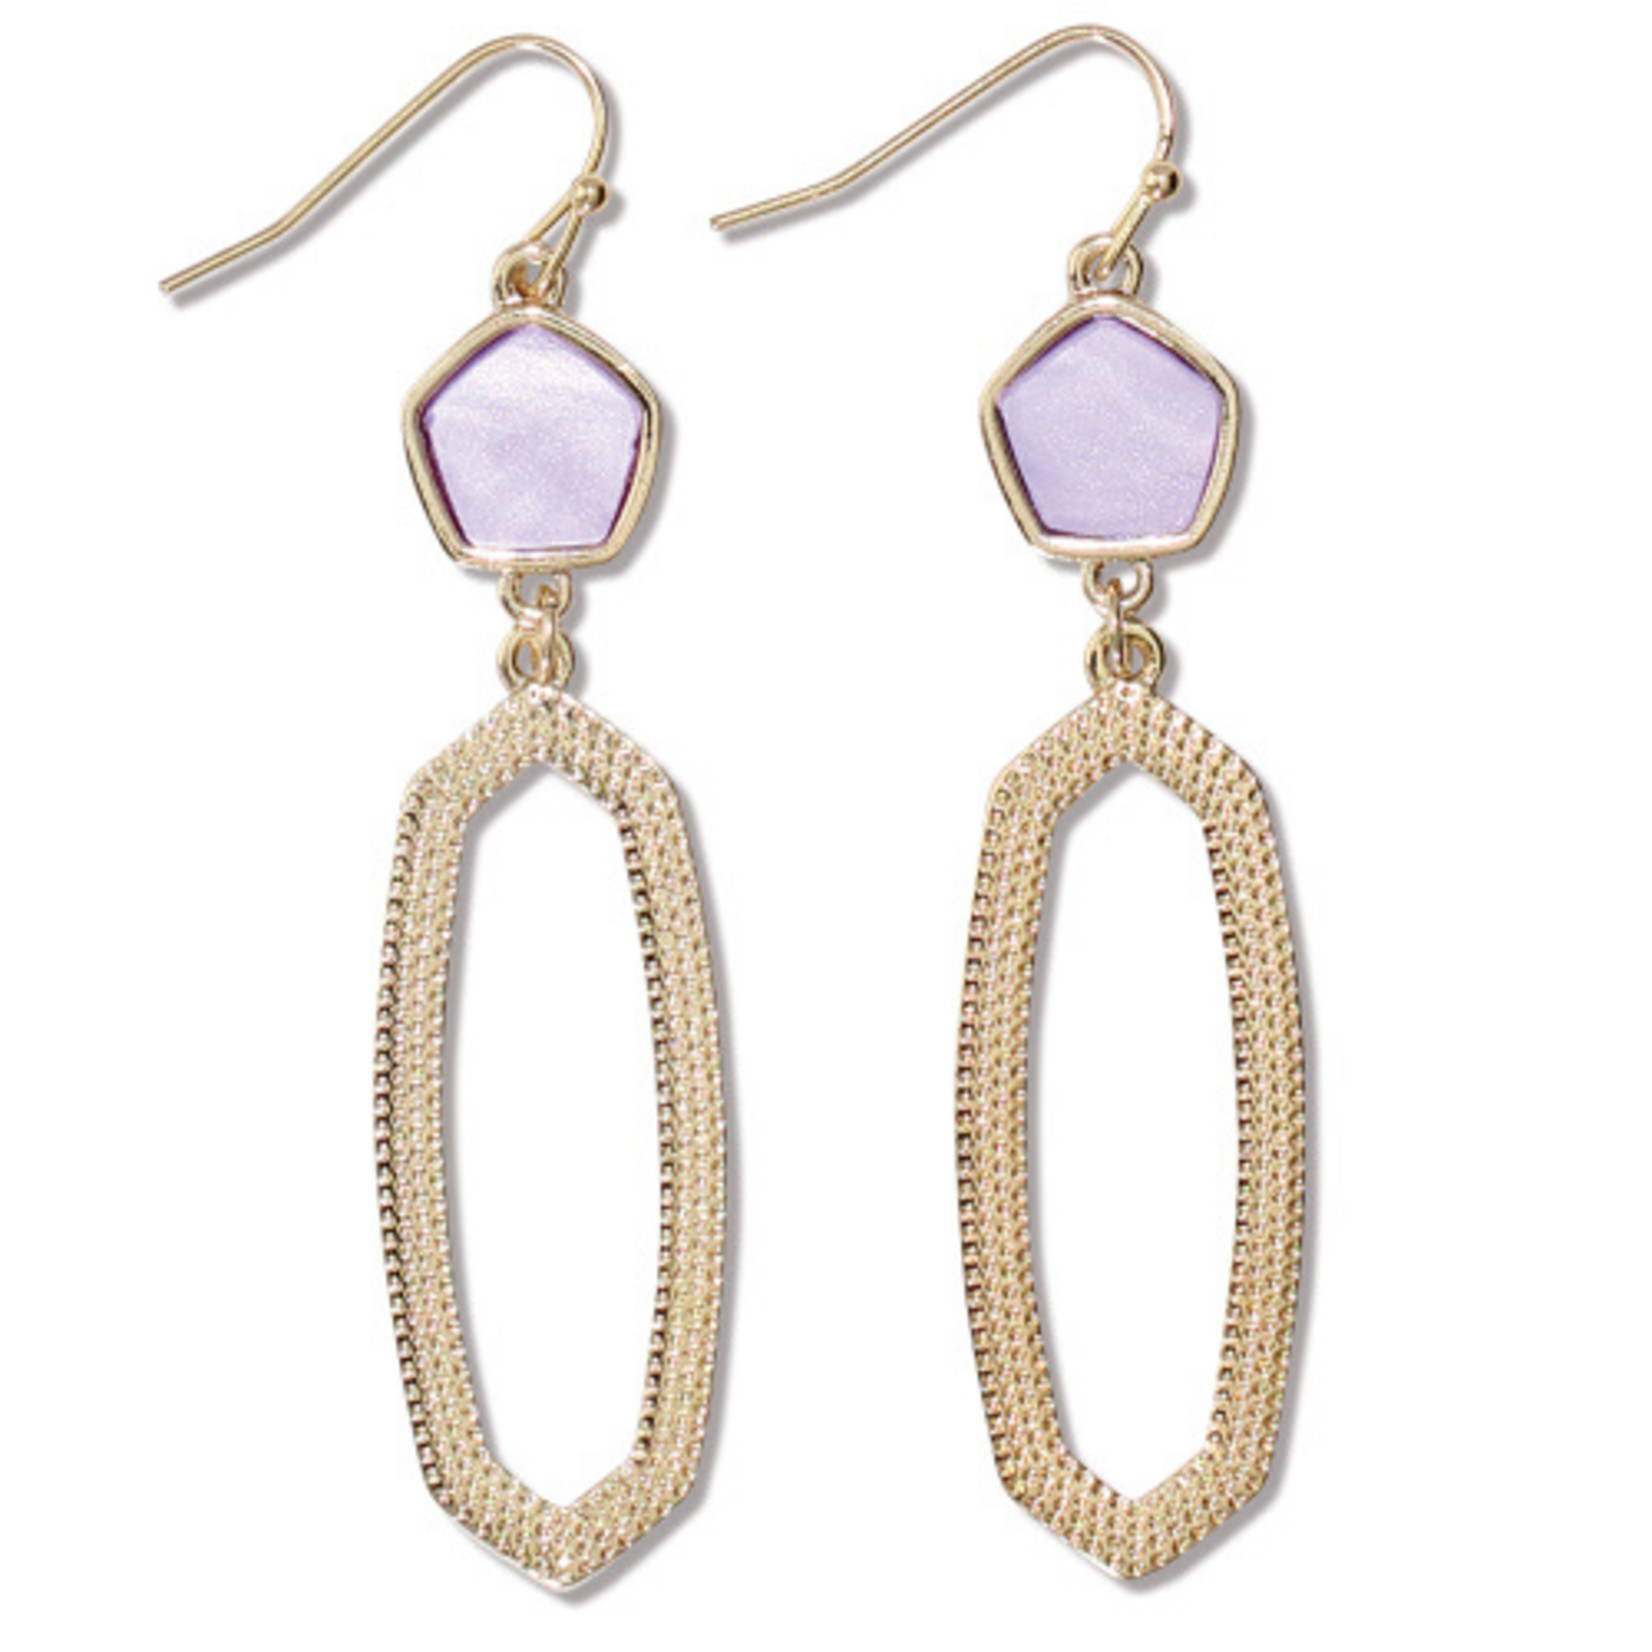 Periwinkle Periwinkle Earrings Gold and Purple Drops